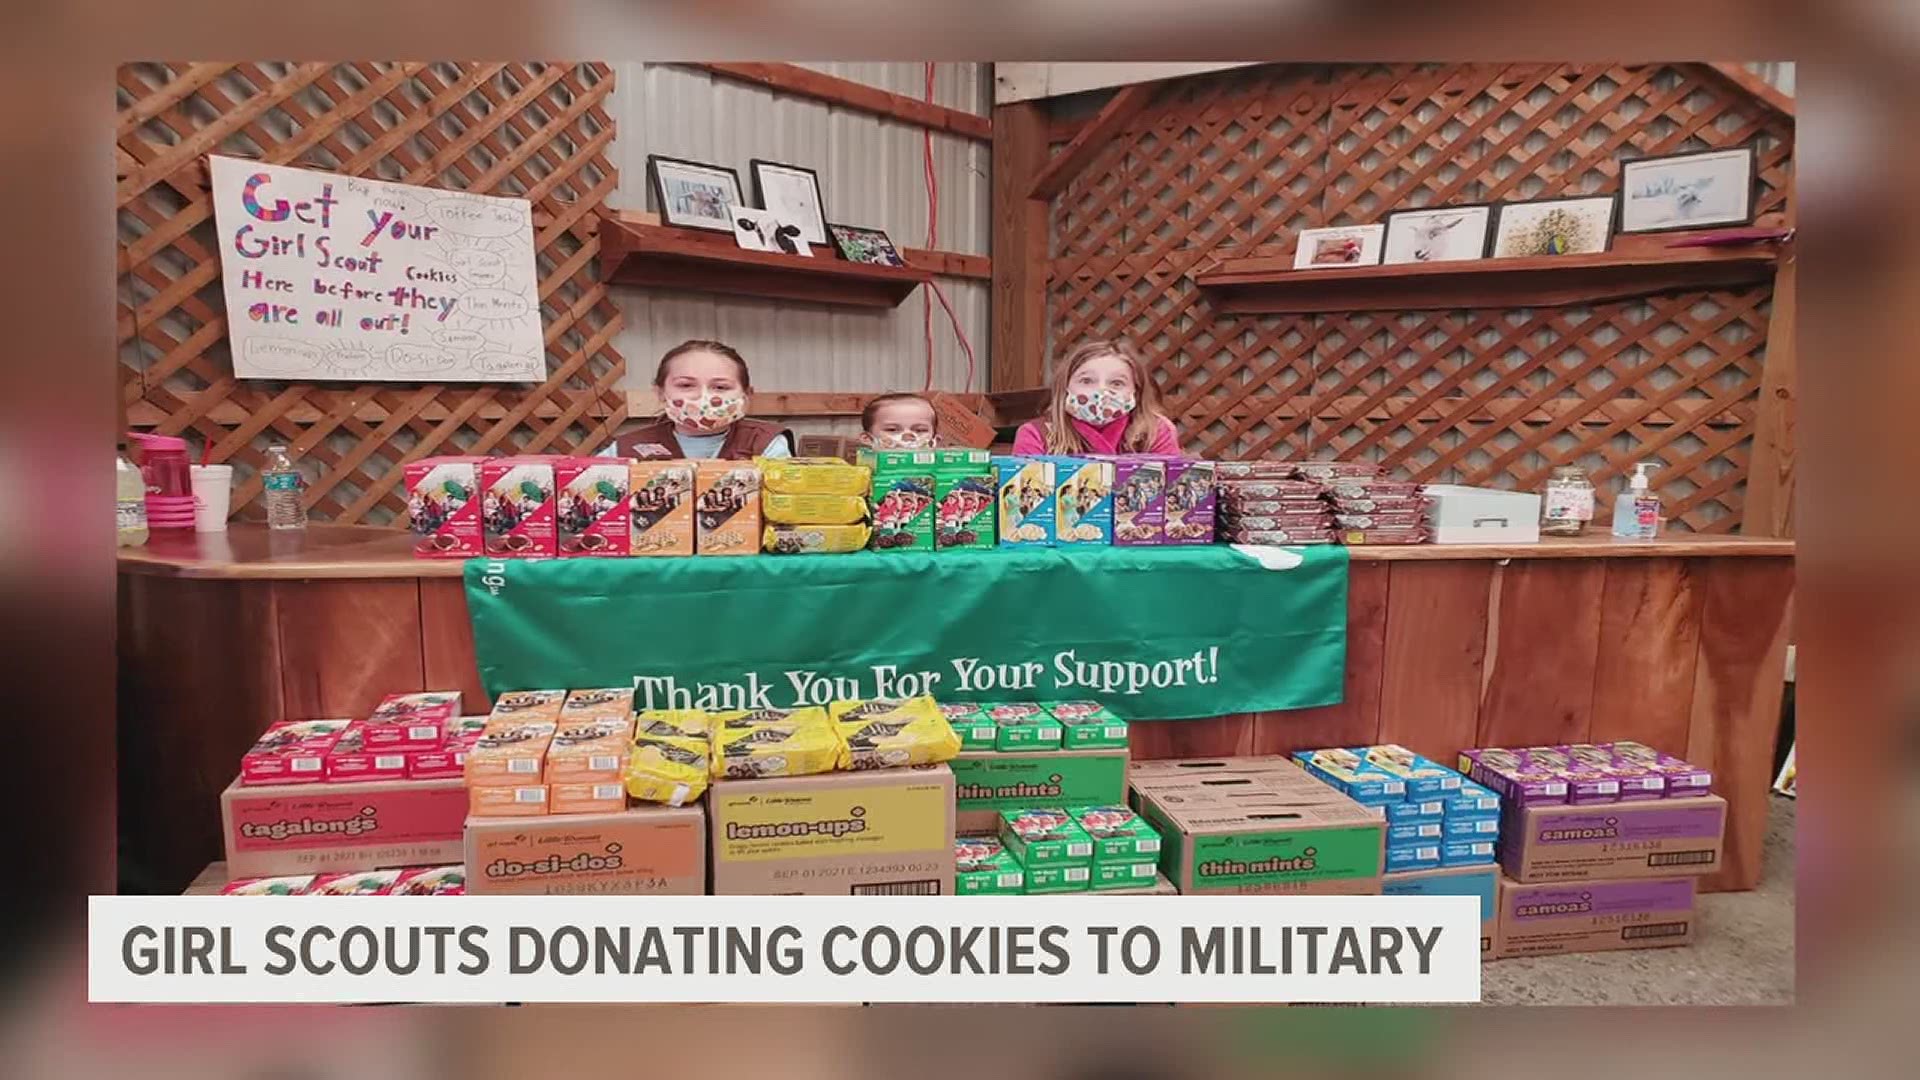 Girl Scouts donated nearly 50,000 cookies for Operation Gratitude to include in their care packages to military members.